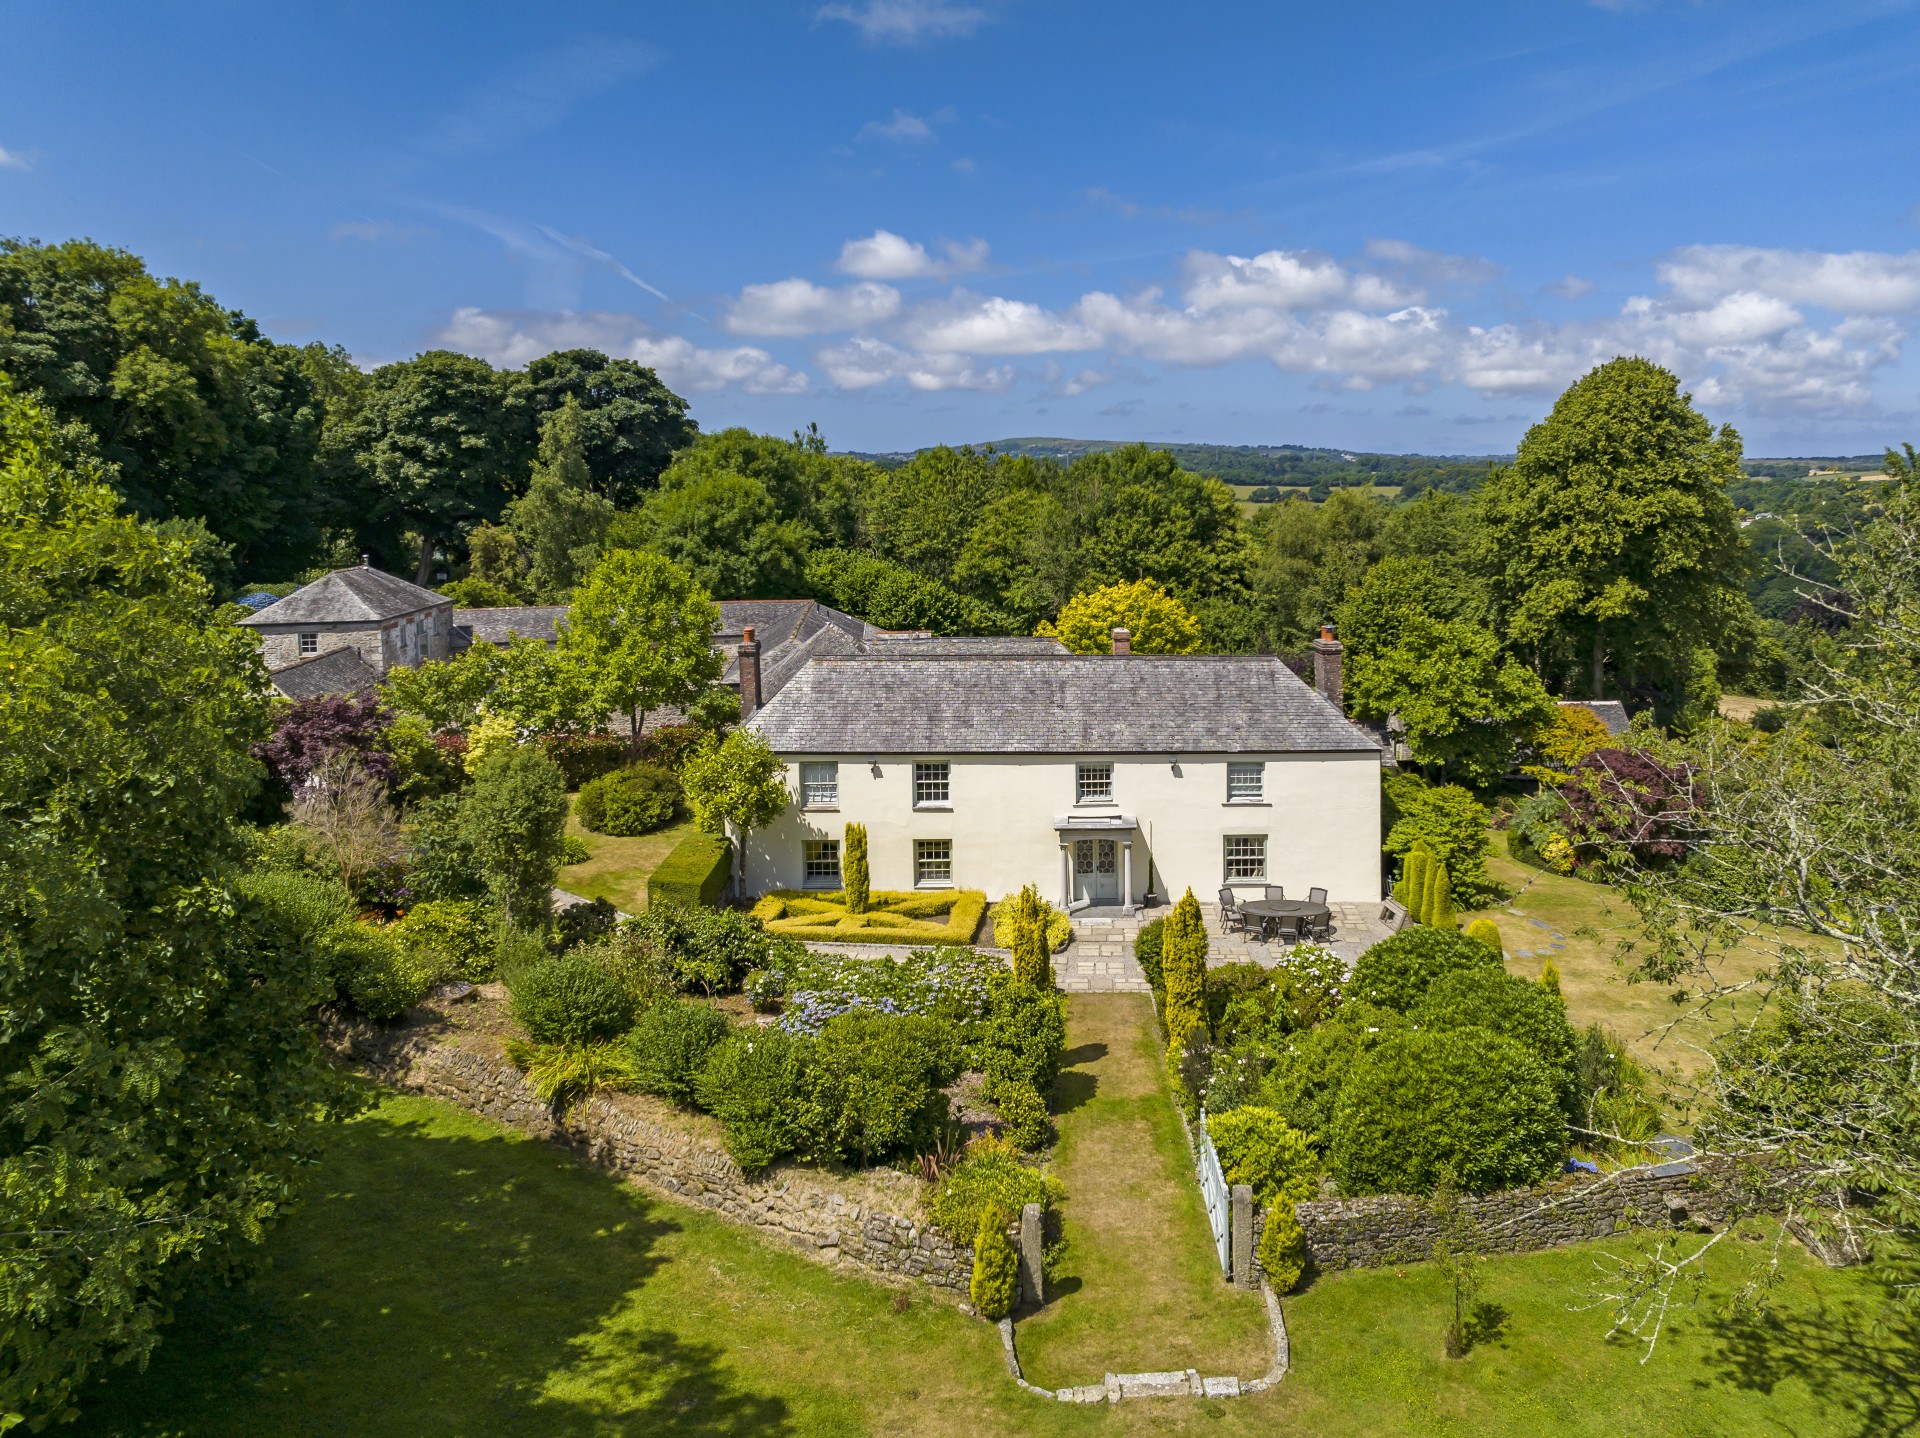 can’t-decide-between-a-dream-home-in-north-or-south-cornwall?-this-delightful-mini-estate-offers-the-best-of-both